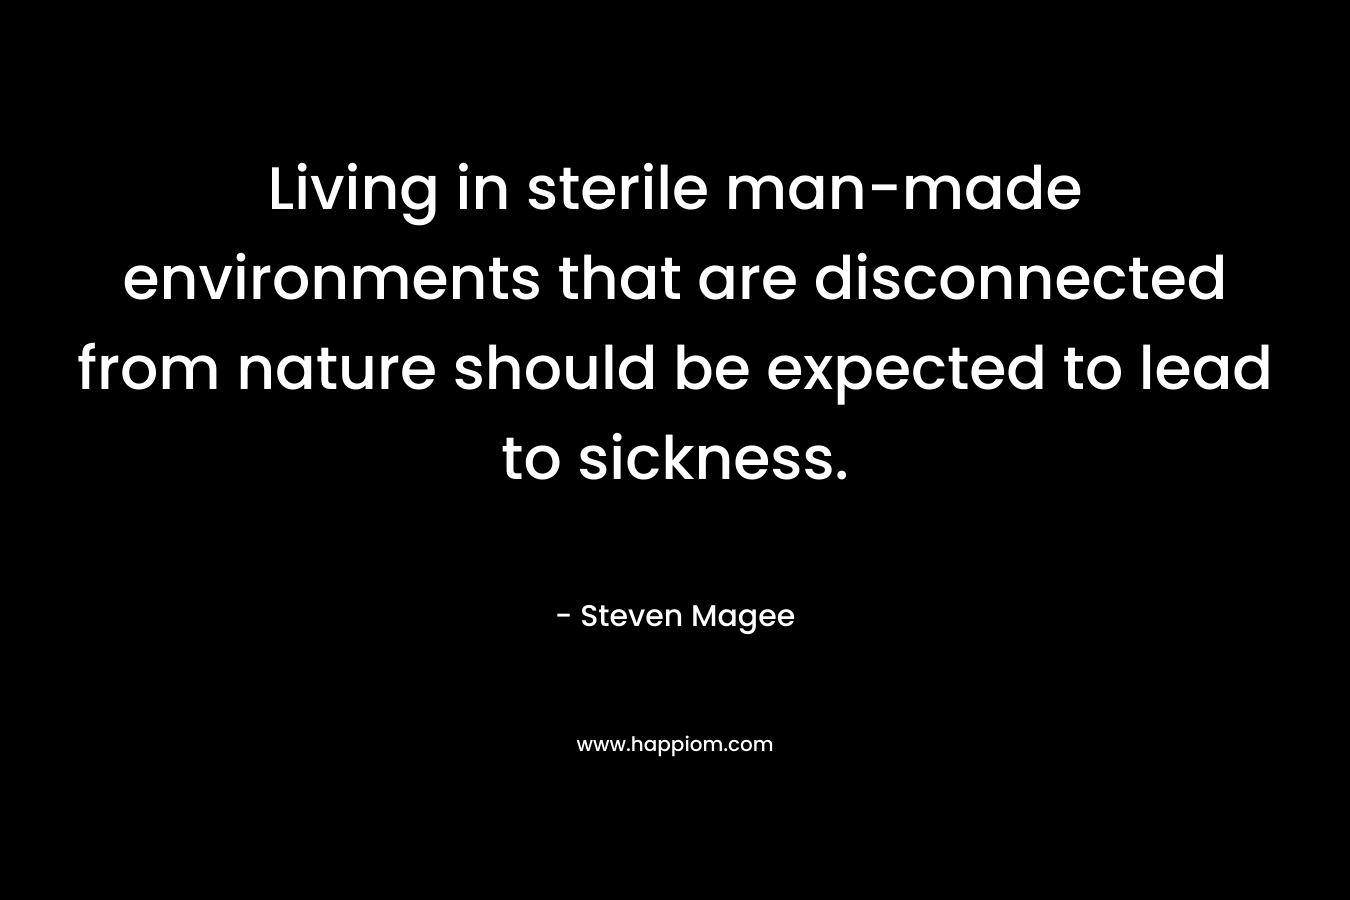 Living in sterile man-made environments that are disconnected from nature should be expected to lead to sickness. – Steven Magee